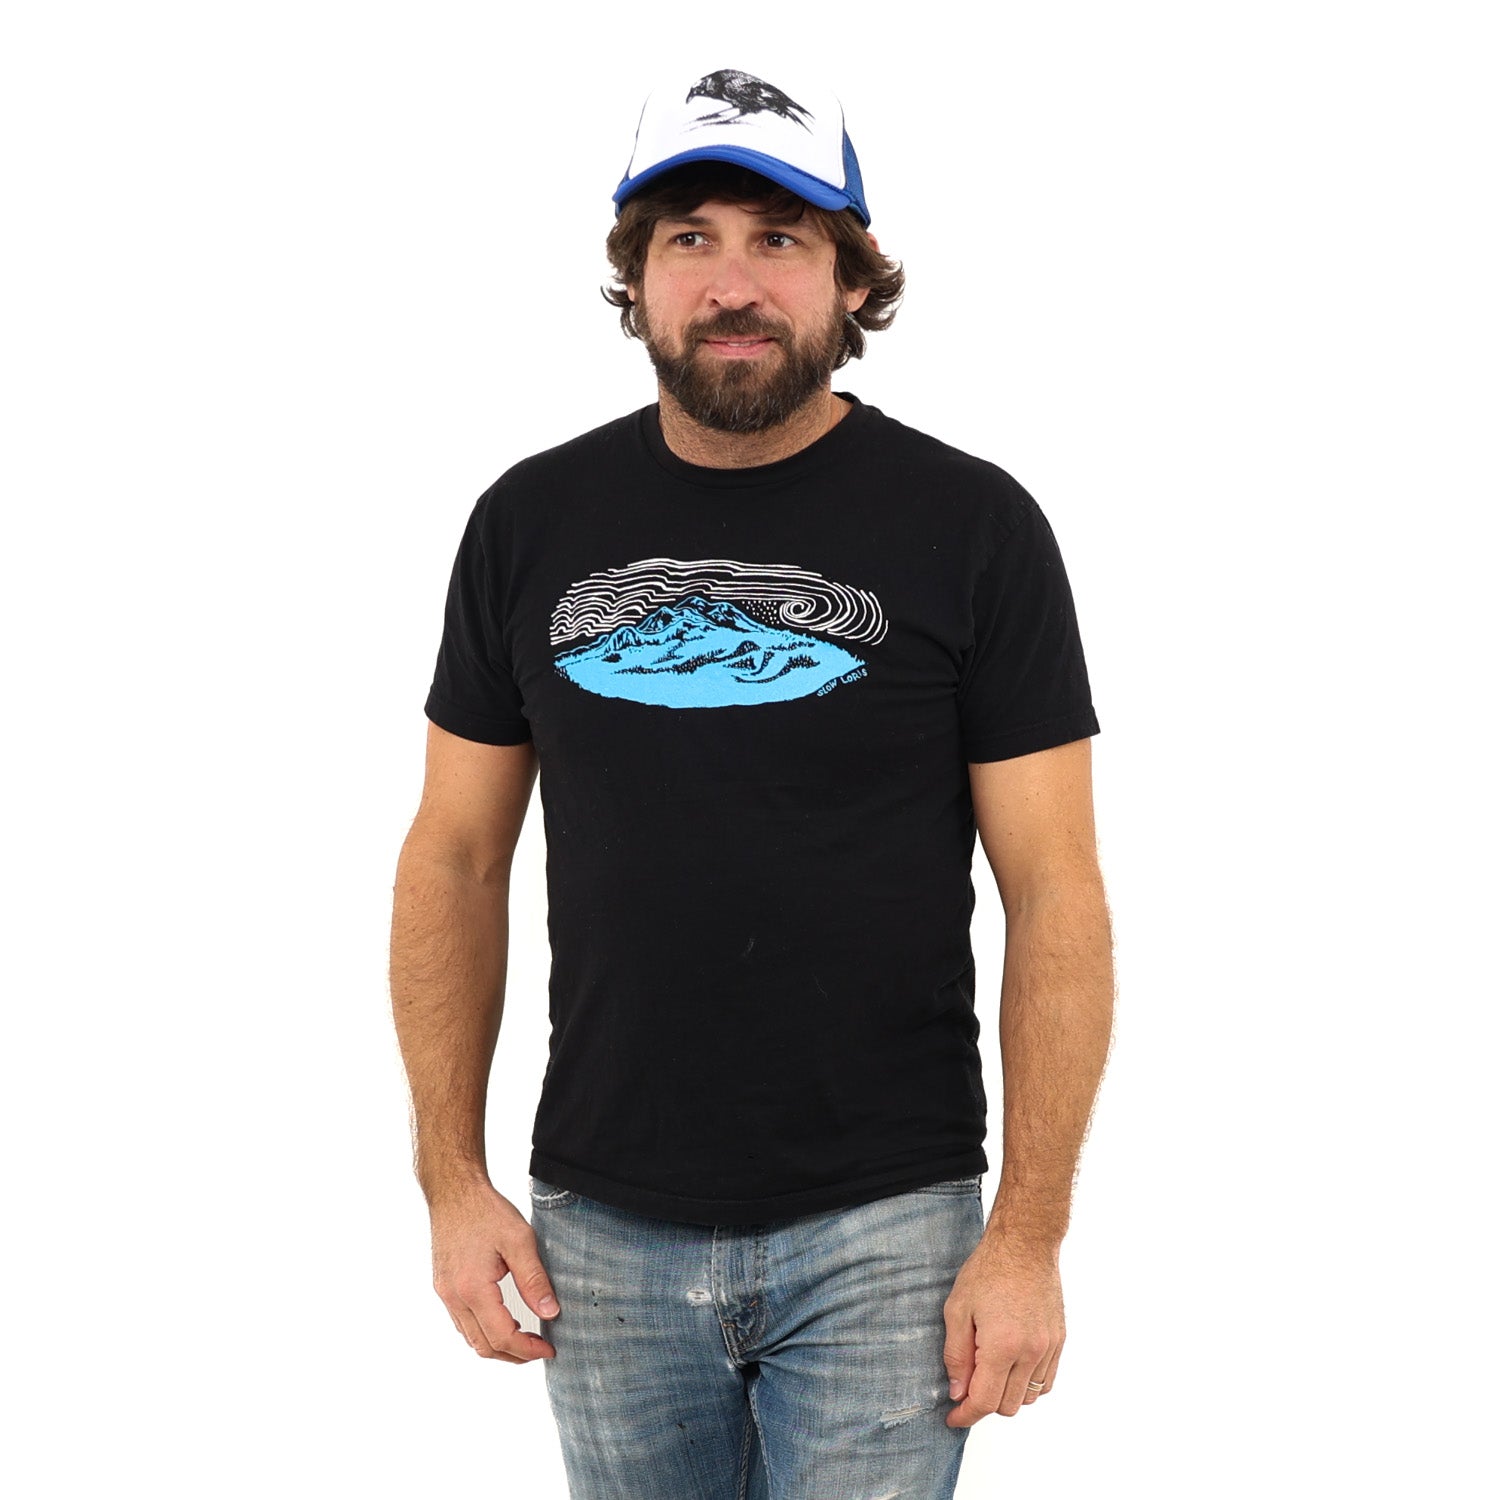 Man wearing a ball cap in blue jeans and a black t-shirt with a blue mountain and white wind lines screenprinted